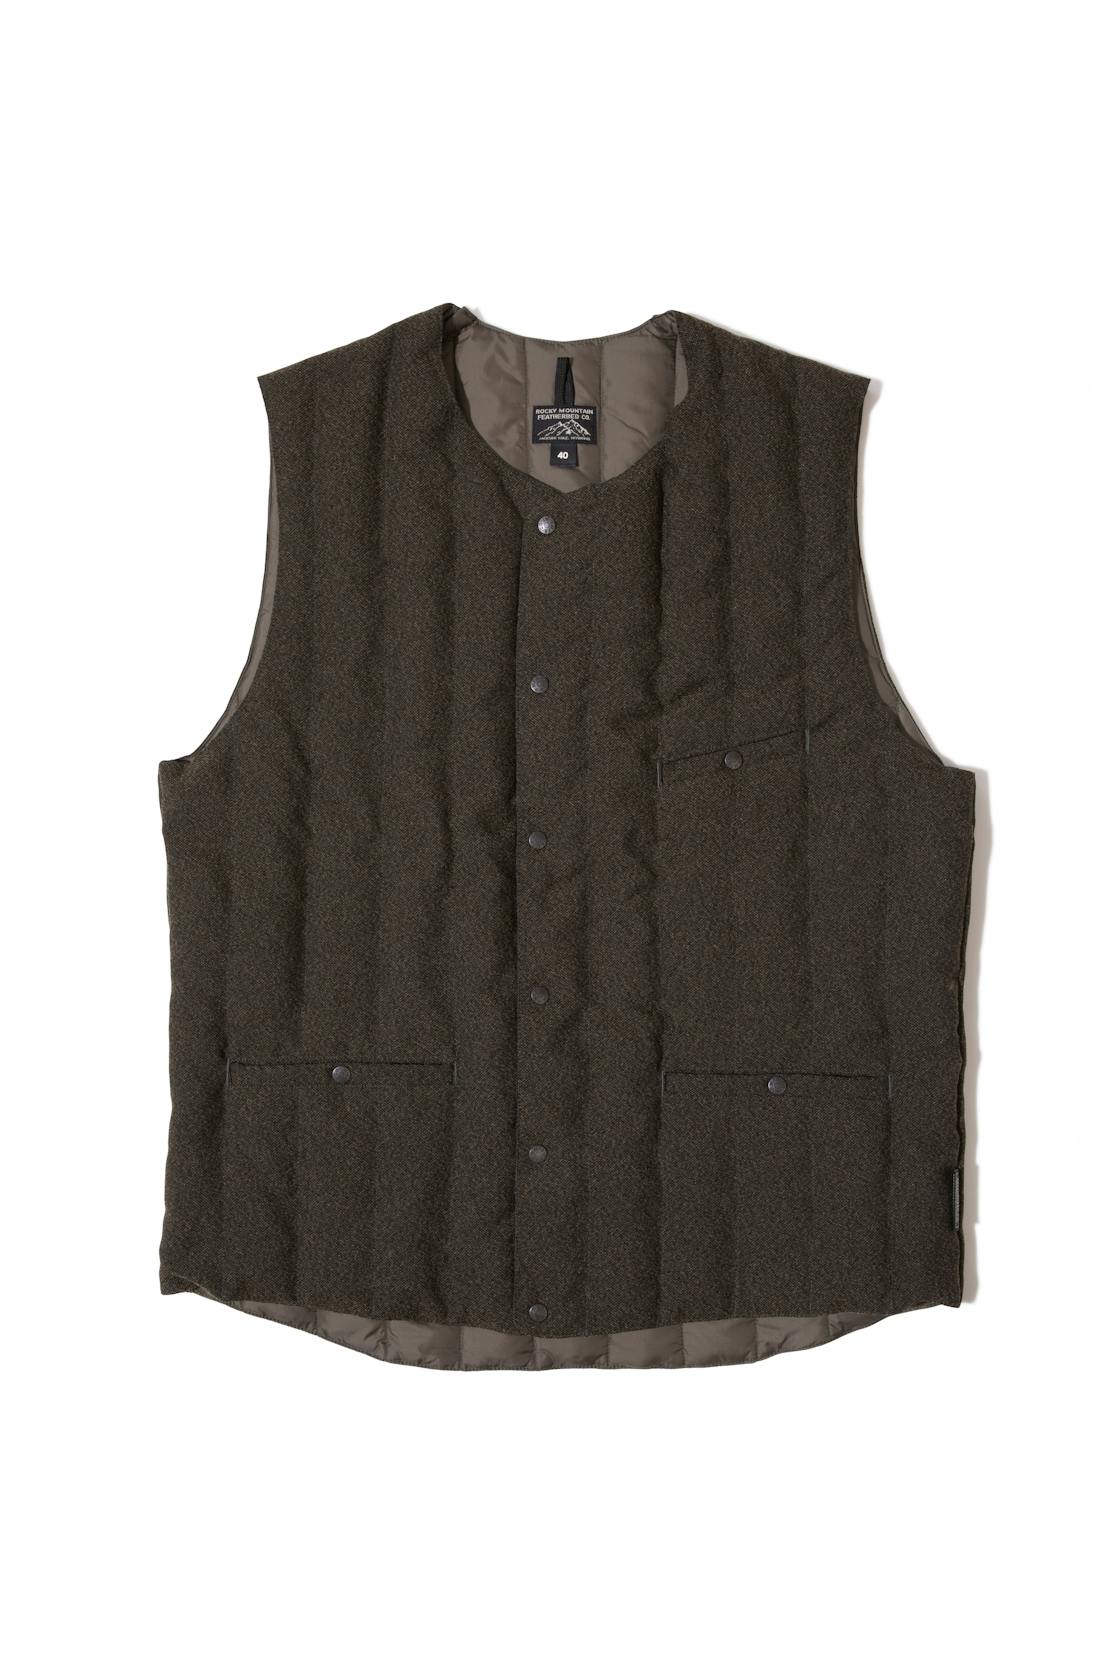 Rocky Mountain 200-202-31 ST Olive Featherbed Down Vest